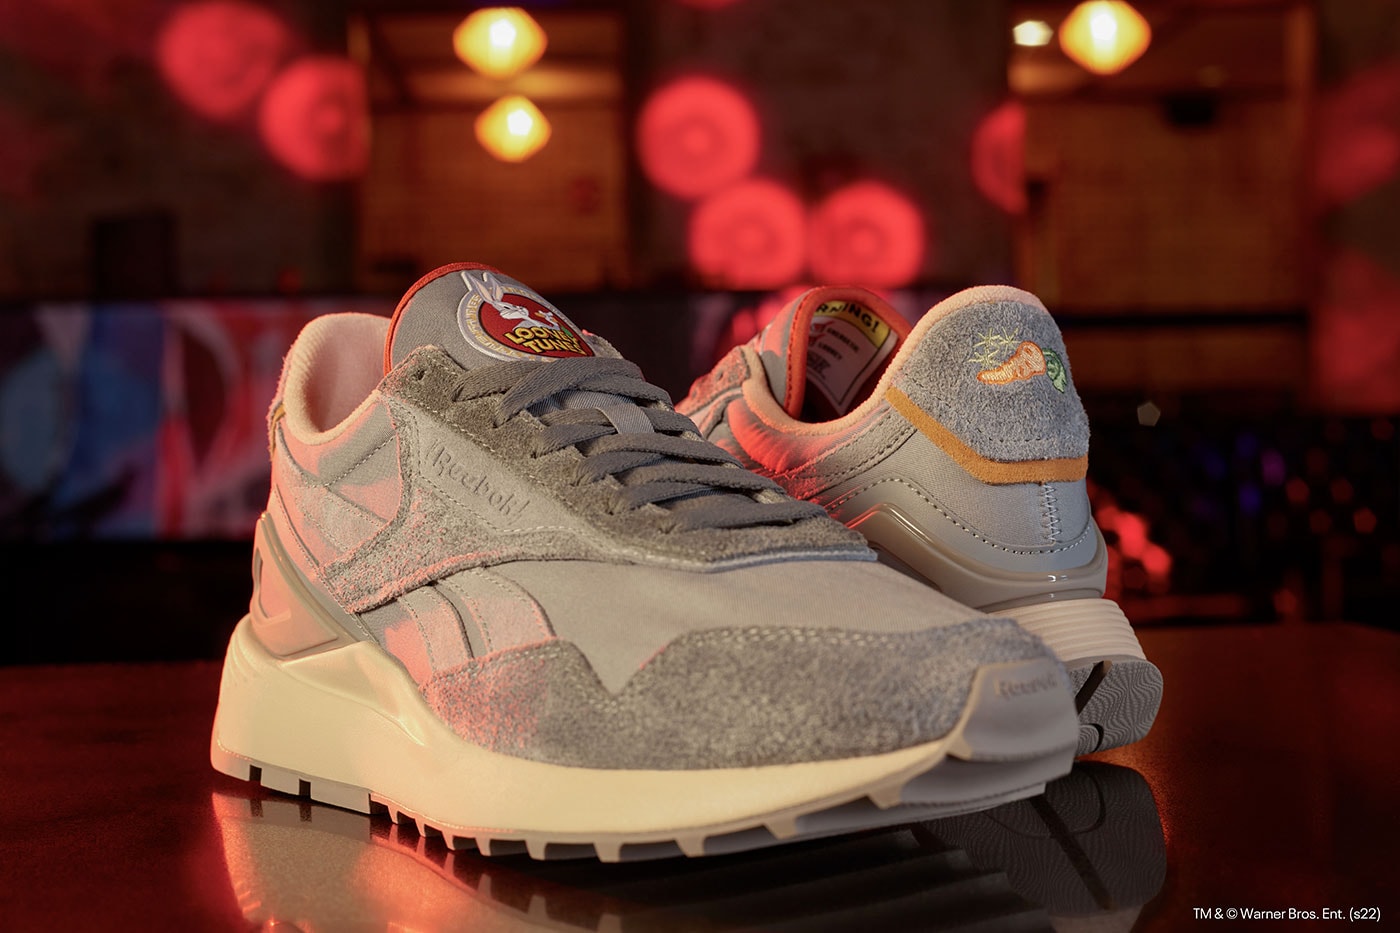 Reebok and Warner Bros. Tap Into 90s Nostalgia for an Playful Looney Tunes Collection shoes sneakers footwear bugs bunny coyote lunar new year chinese new year cny year of the tiger